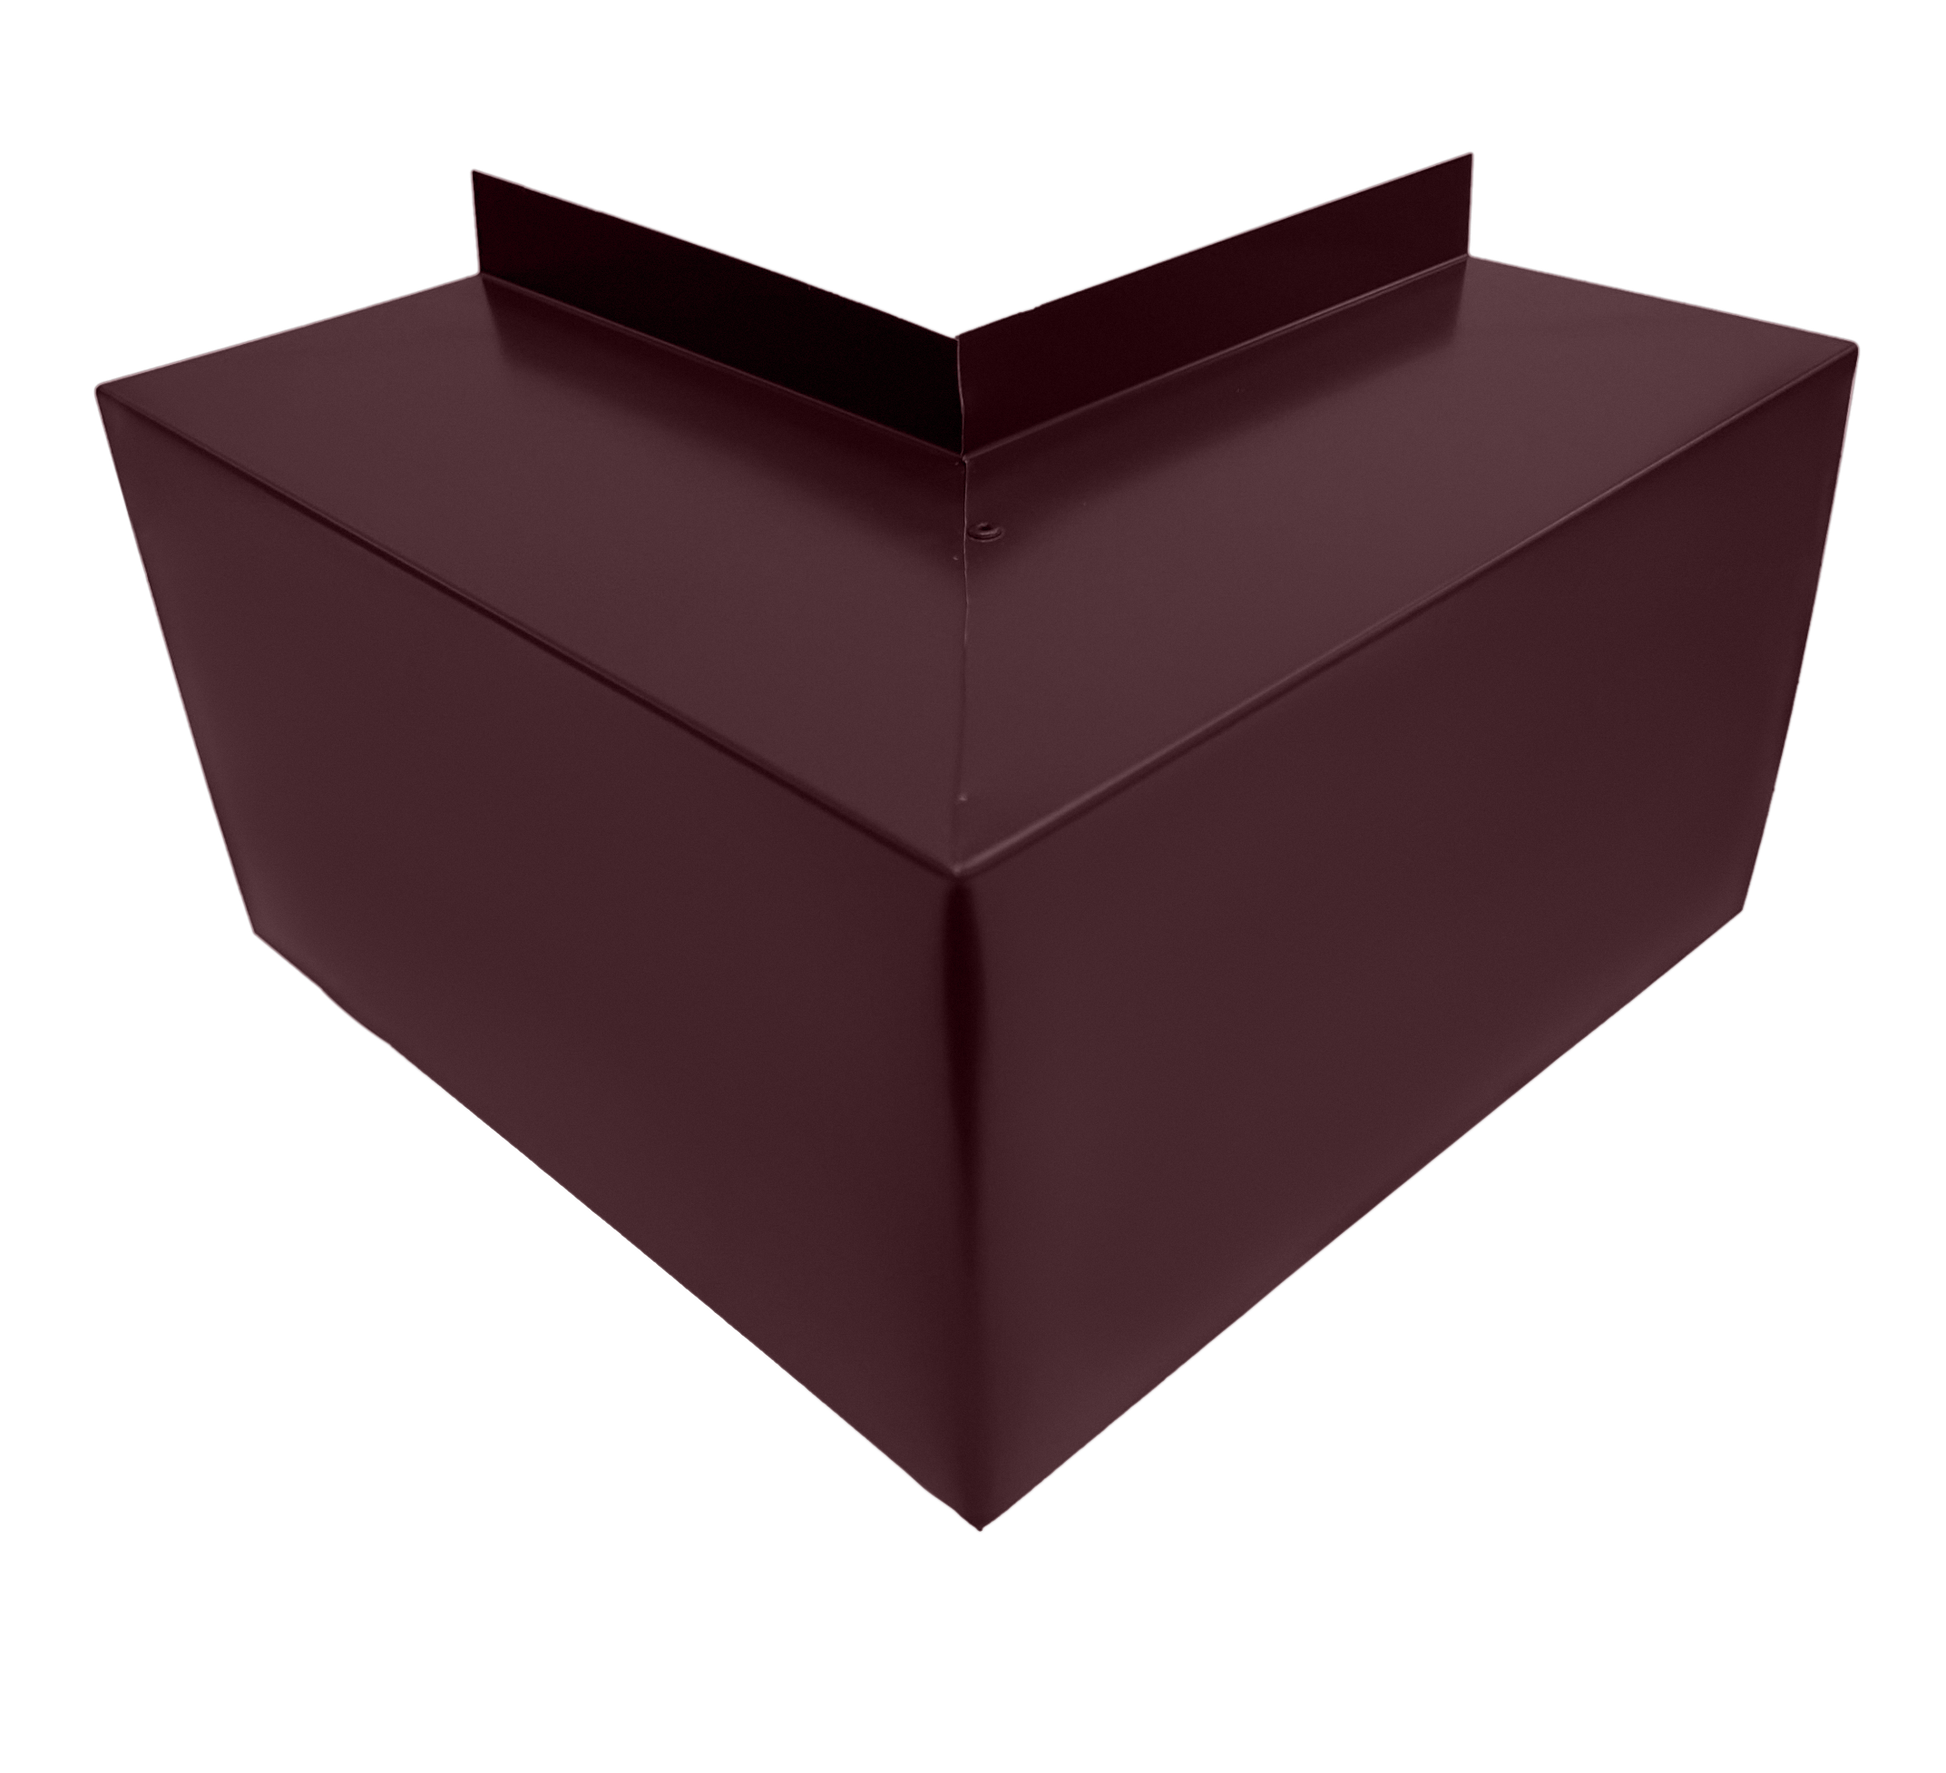 A maroon-colored metal object with a geometric design, featuring straight edges and a raised central section forming a right-angle corner, crafted from Perma Cover Commercial Series - 24 Gauge Line Set Cover Outside Corner Elbows - Premium Quality. The surface has a smooth, matte finish for easy installation.